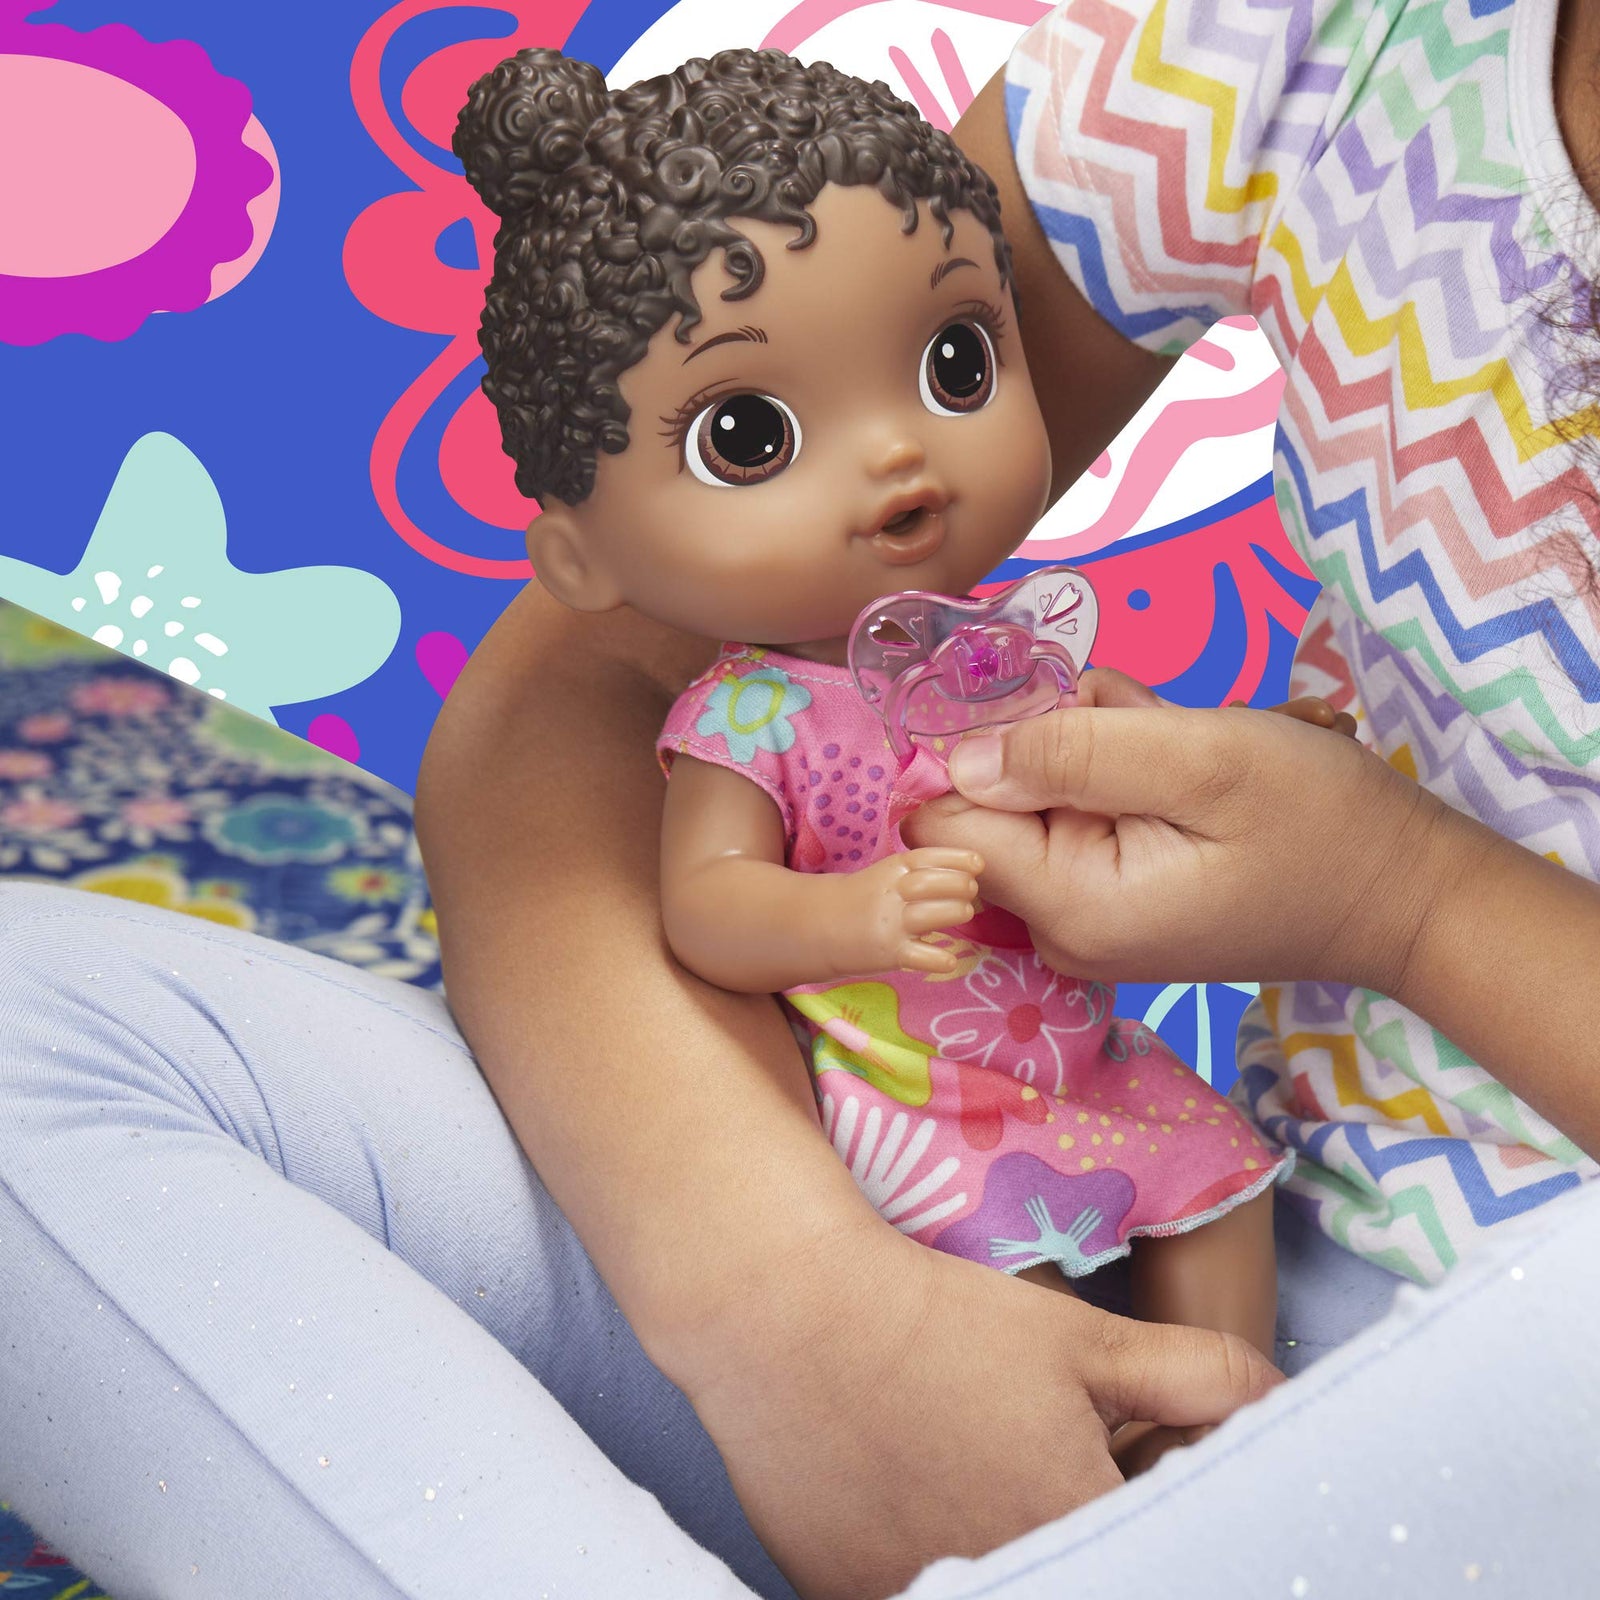 Baby Alive Baby Lil Sounds: Interactive Black Hair Baby Doll for Girls & Boys Ages 3 & Up, Makes 10 Sound Effects, Including Giggles, Cries, Baby Doll with Pacifier